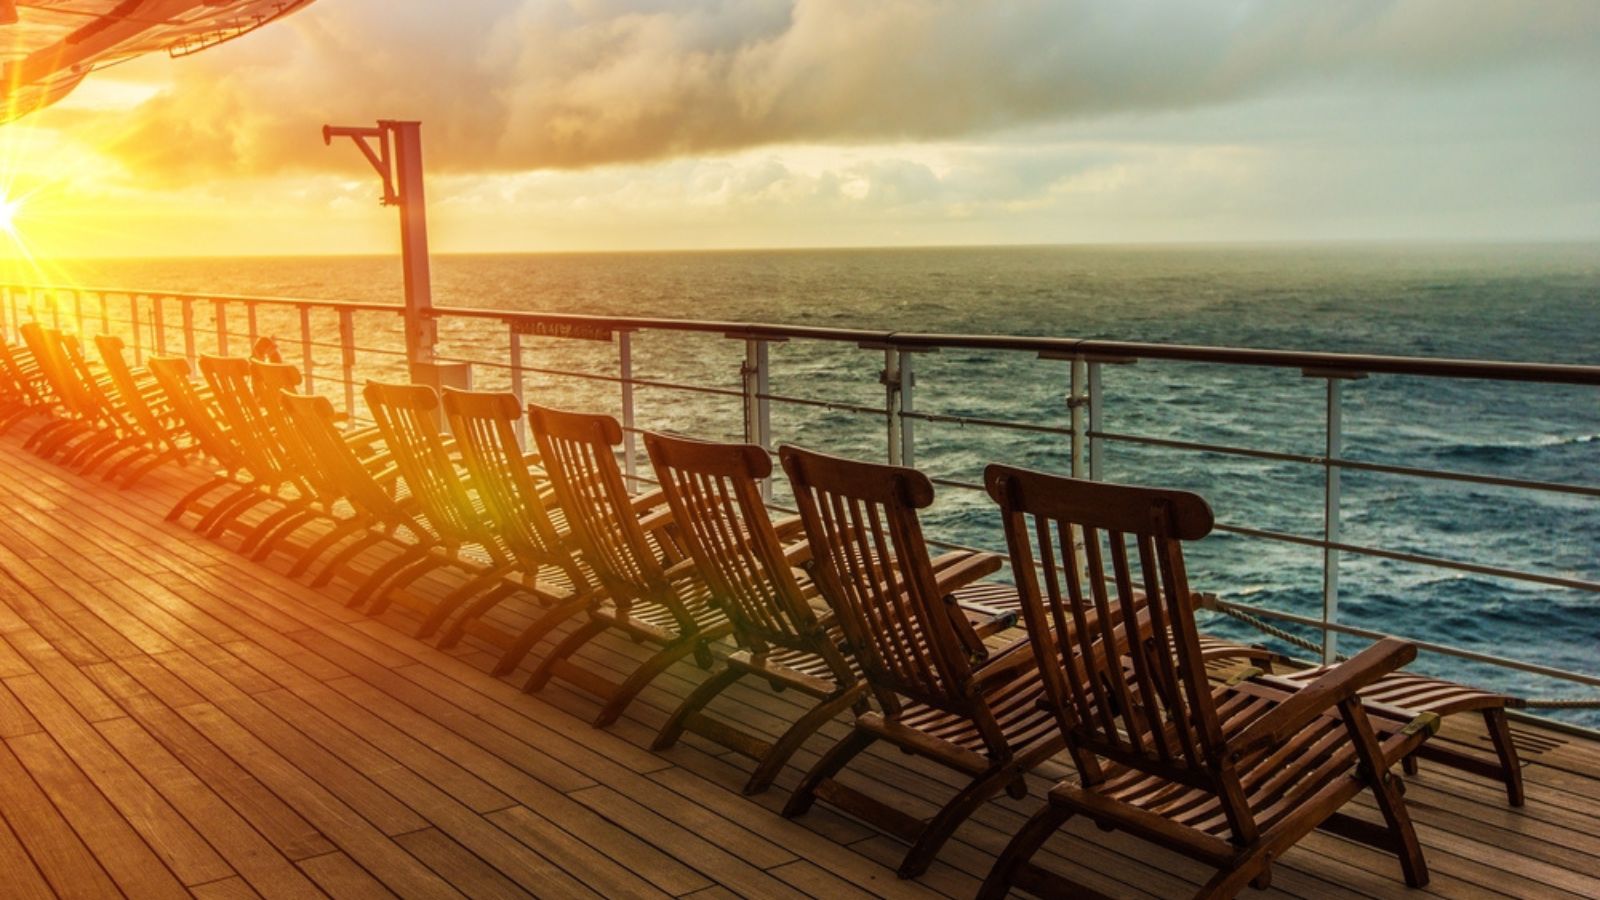 Cruise ship deck view at sunset.